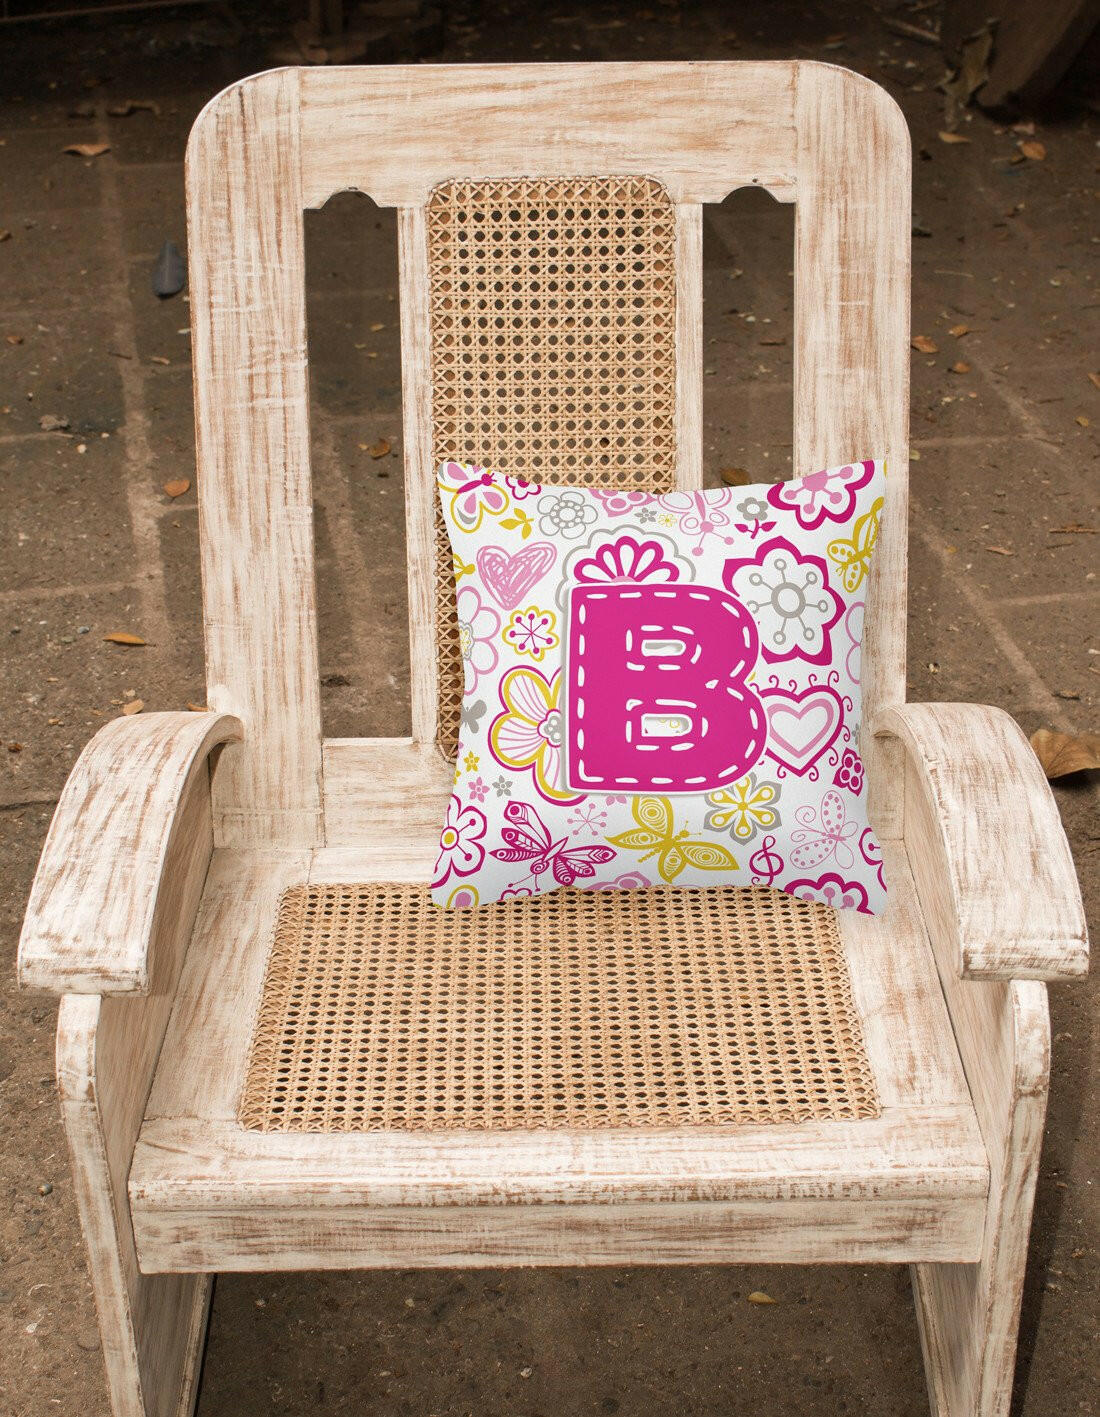 Letter B Flowers and Butterflies Pink Canvas Fabric Decorative Pillow CJ2005-BPW1414 by Caroline's Treasures